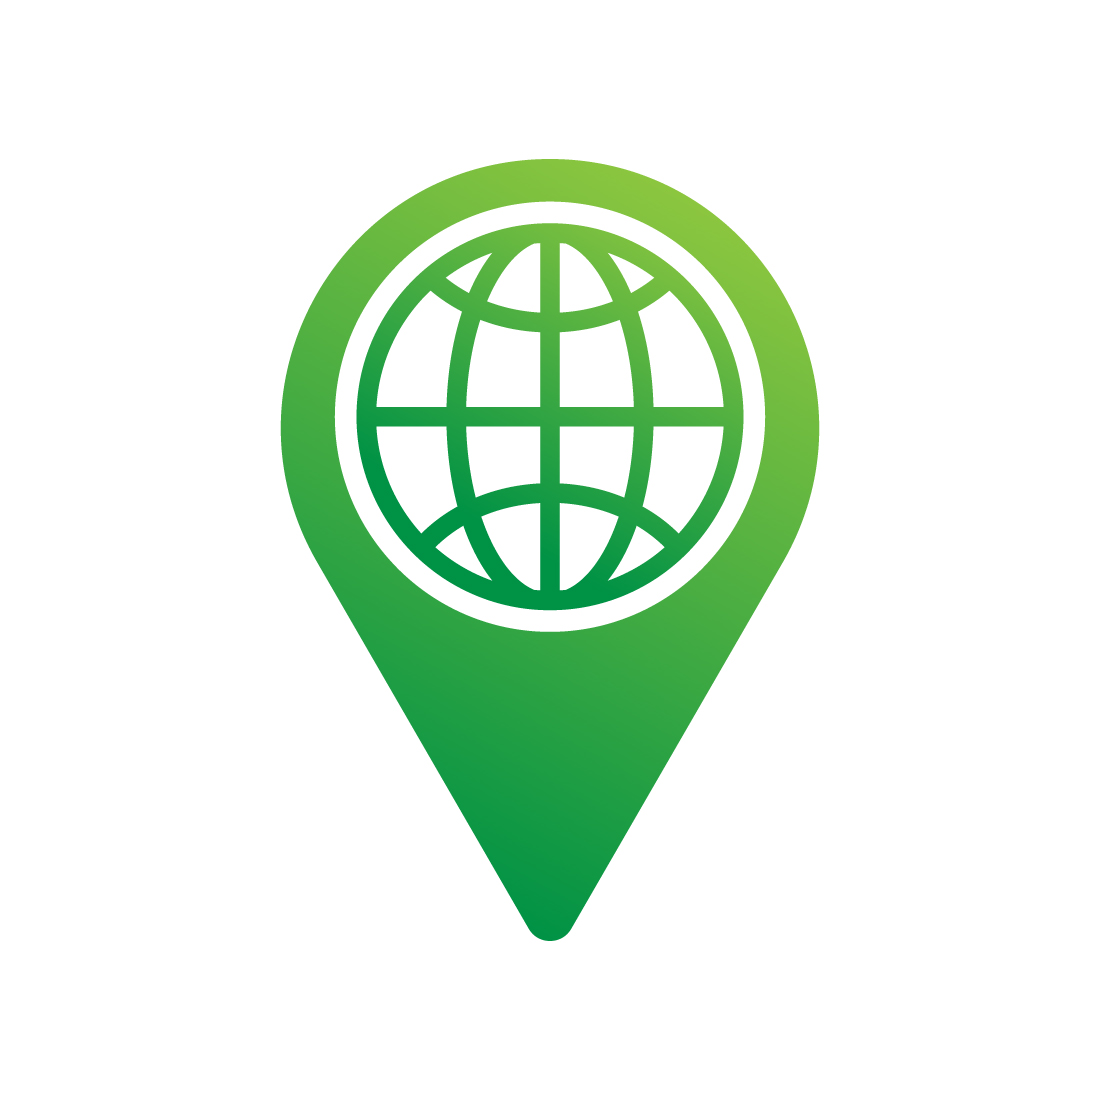 Initials Location logo design vector images World Map logo design Google map logo best icon template illustration Tracking icon design preview image.